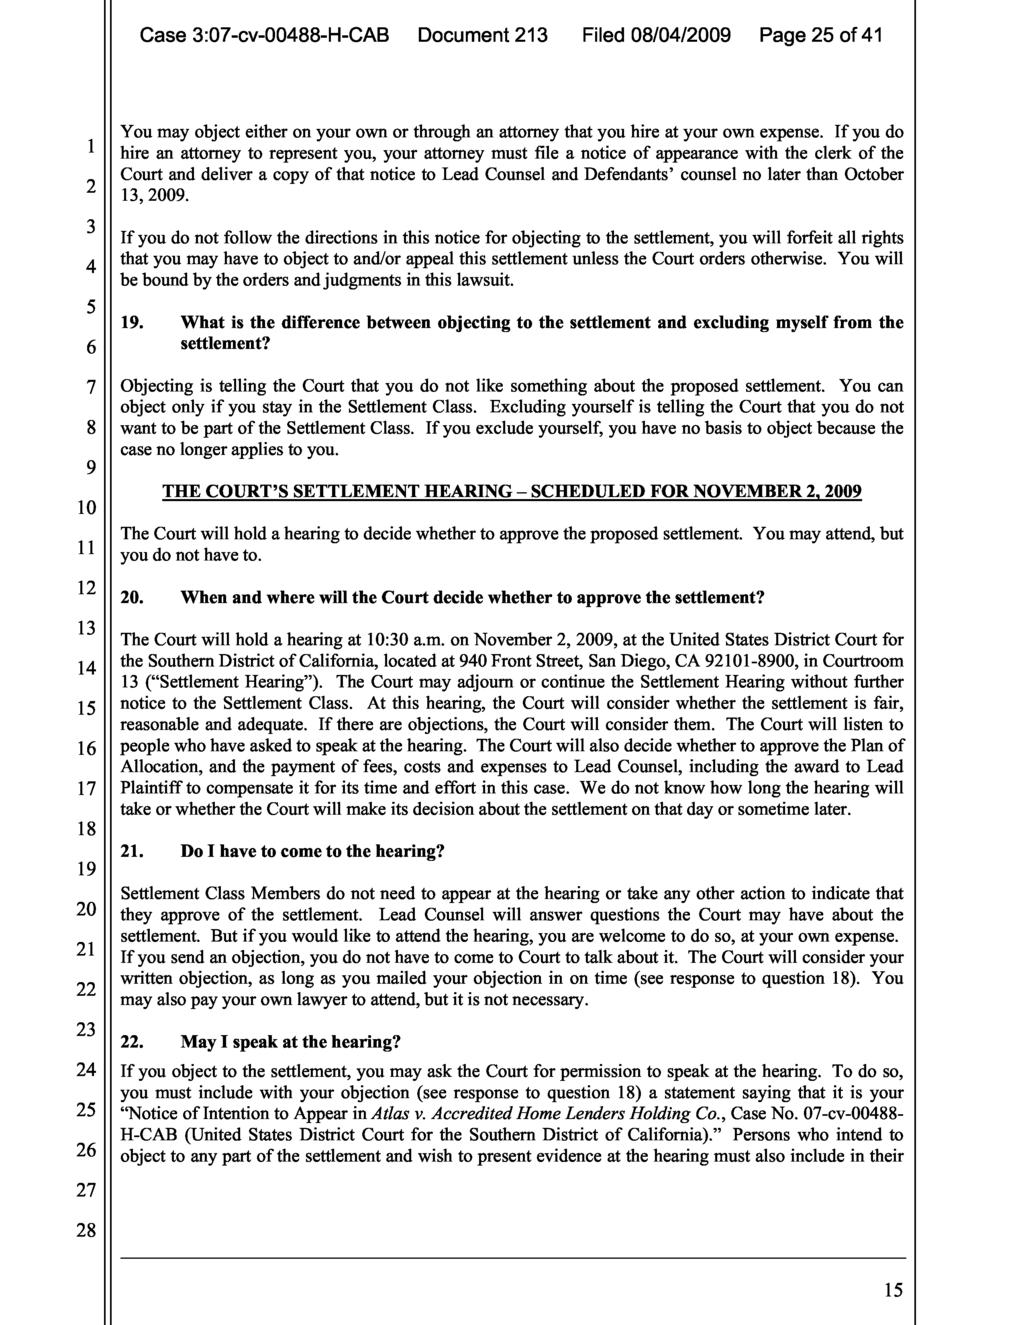 Case 3:07-cv-0088-H-CAB Document 213 Filed 08/0/2009 Page 25 of 1 You may object either on your own or through an attorney that you hire at your own expense.